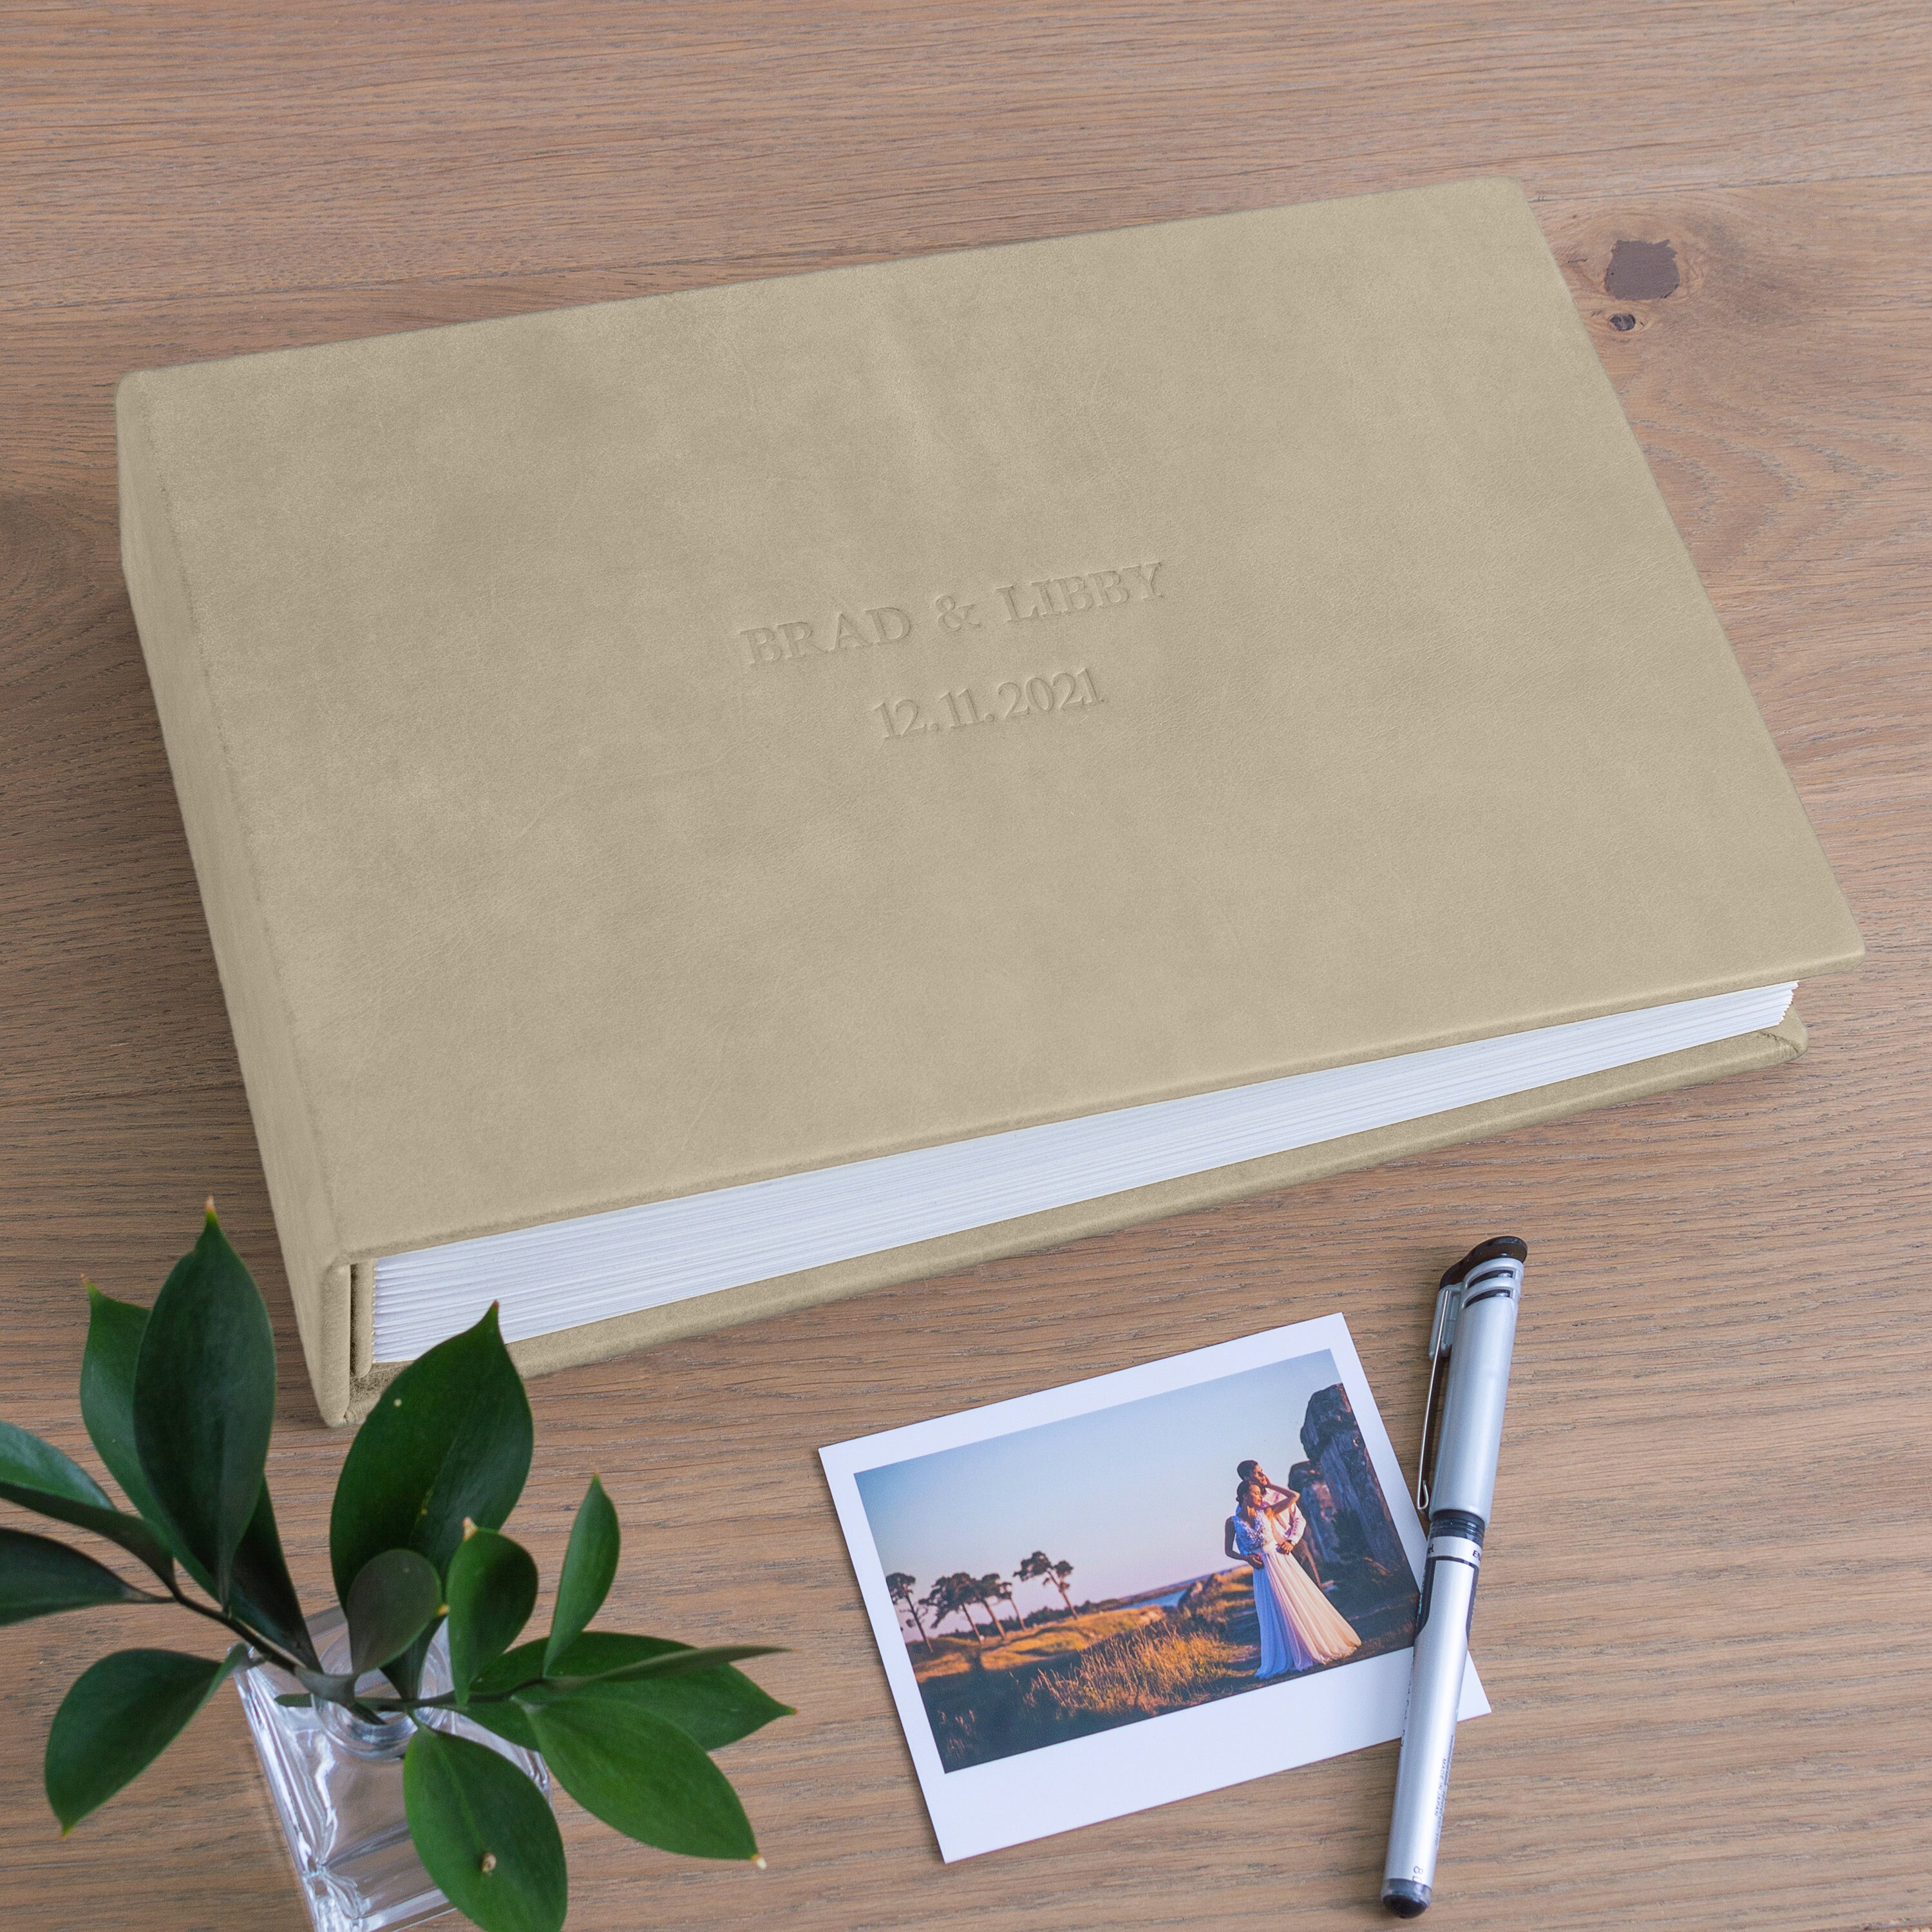 Life Celebration Memorial Book, a meaningful keepsake - by Blue Sky Papers